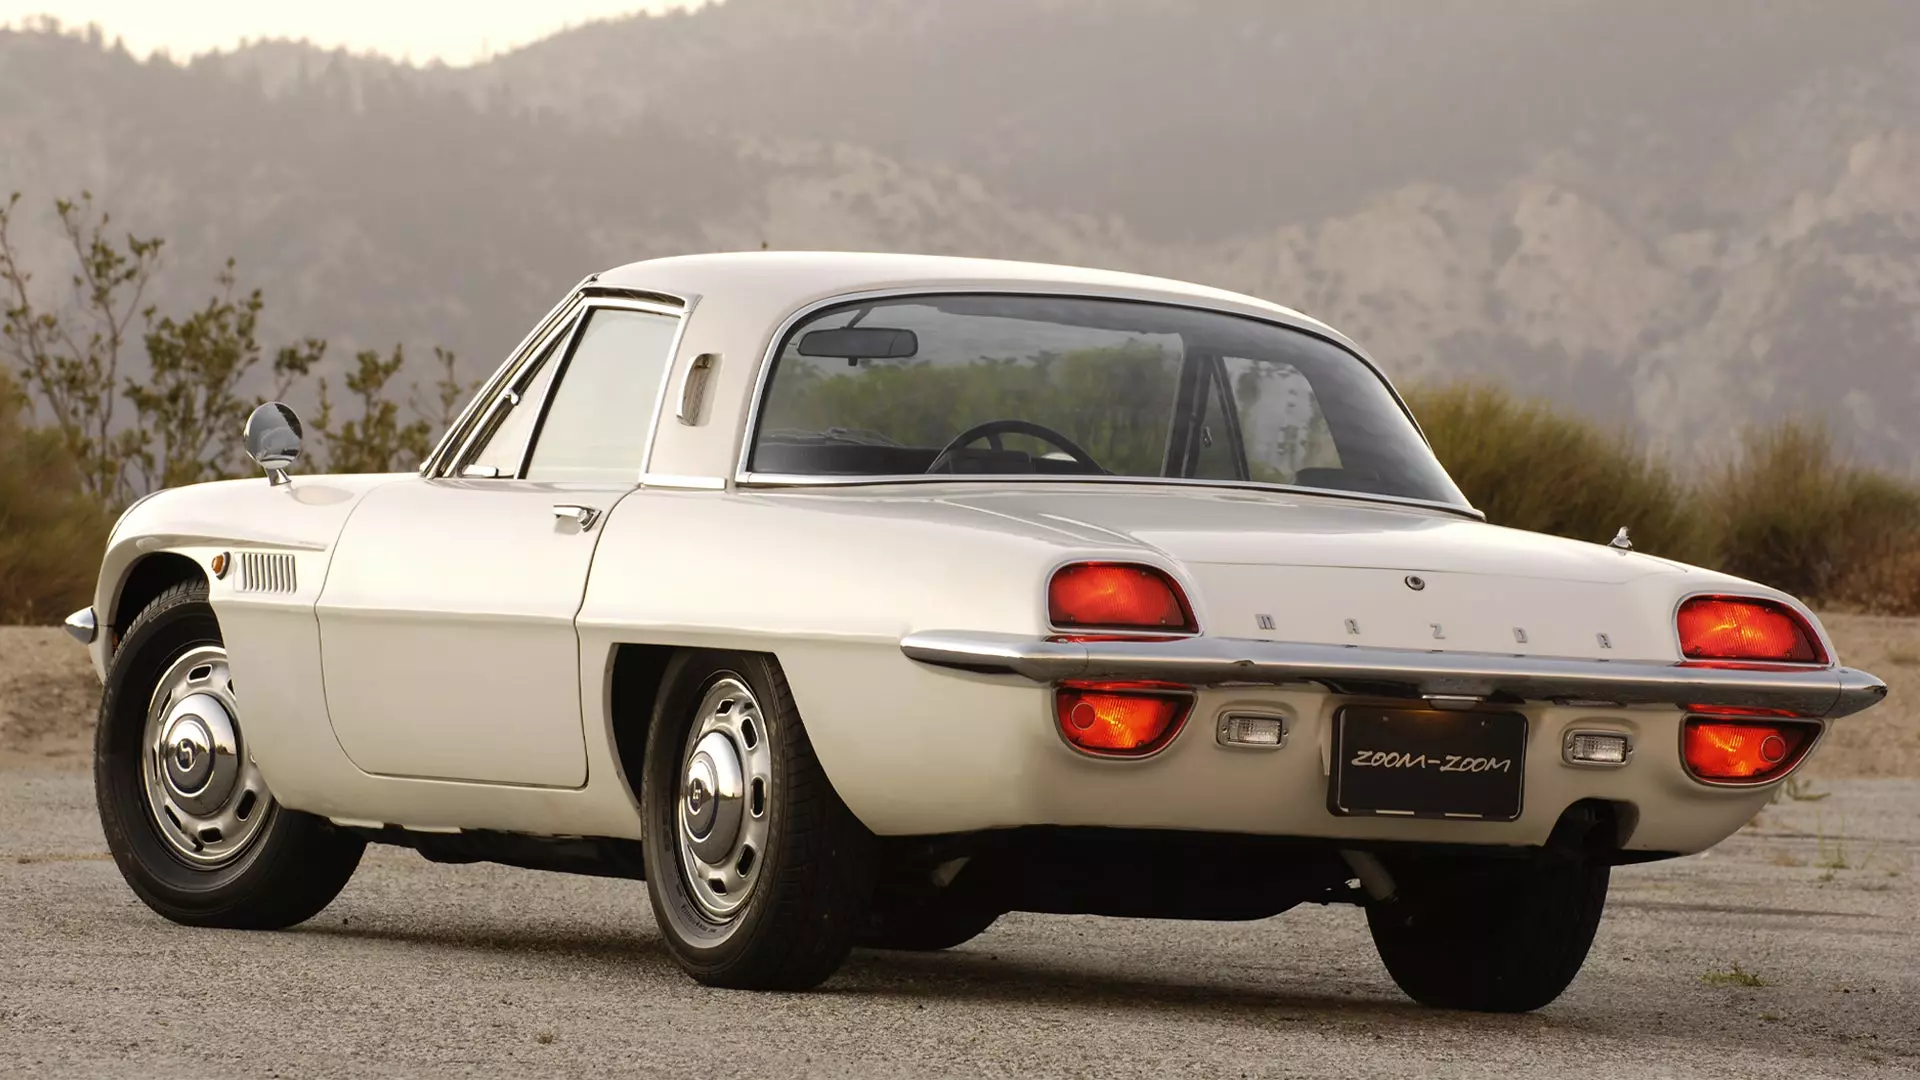 There Really Is No Bad Angle on the Original Mazda Cosmo Sport | Autance